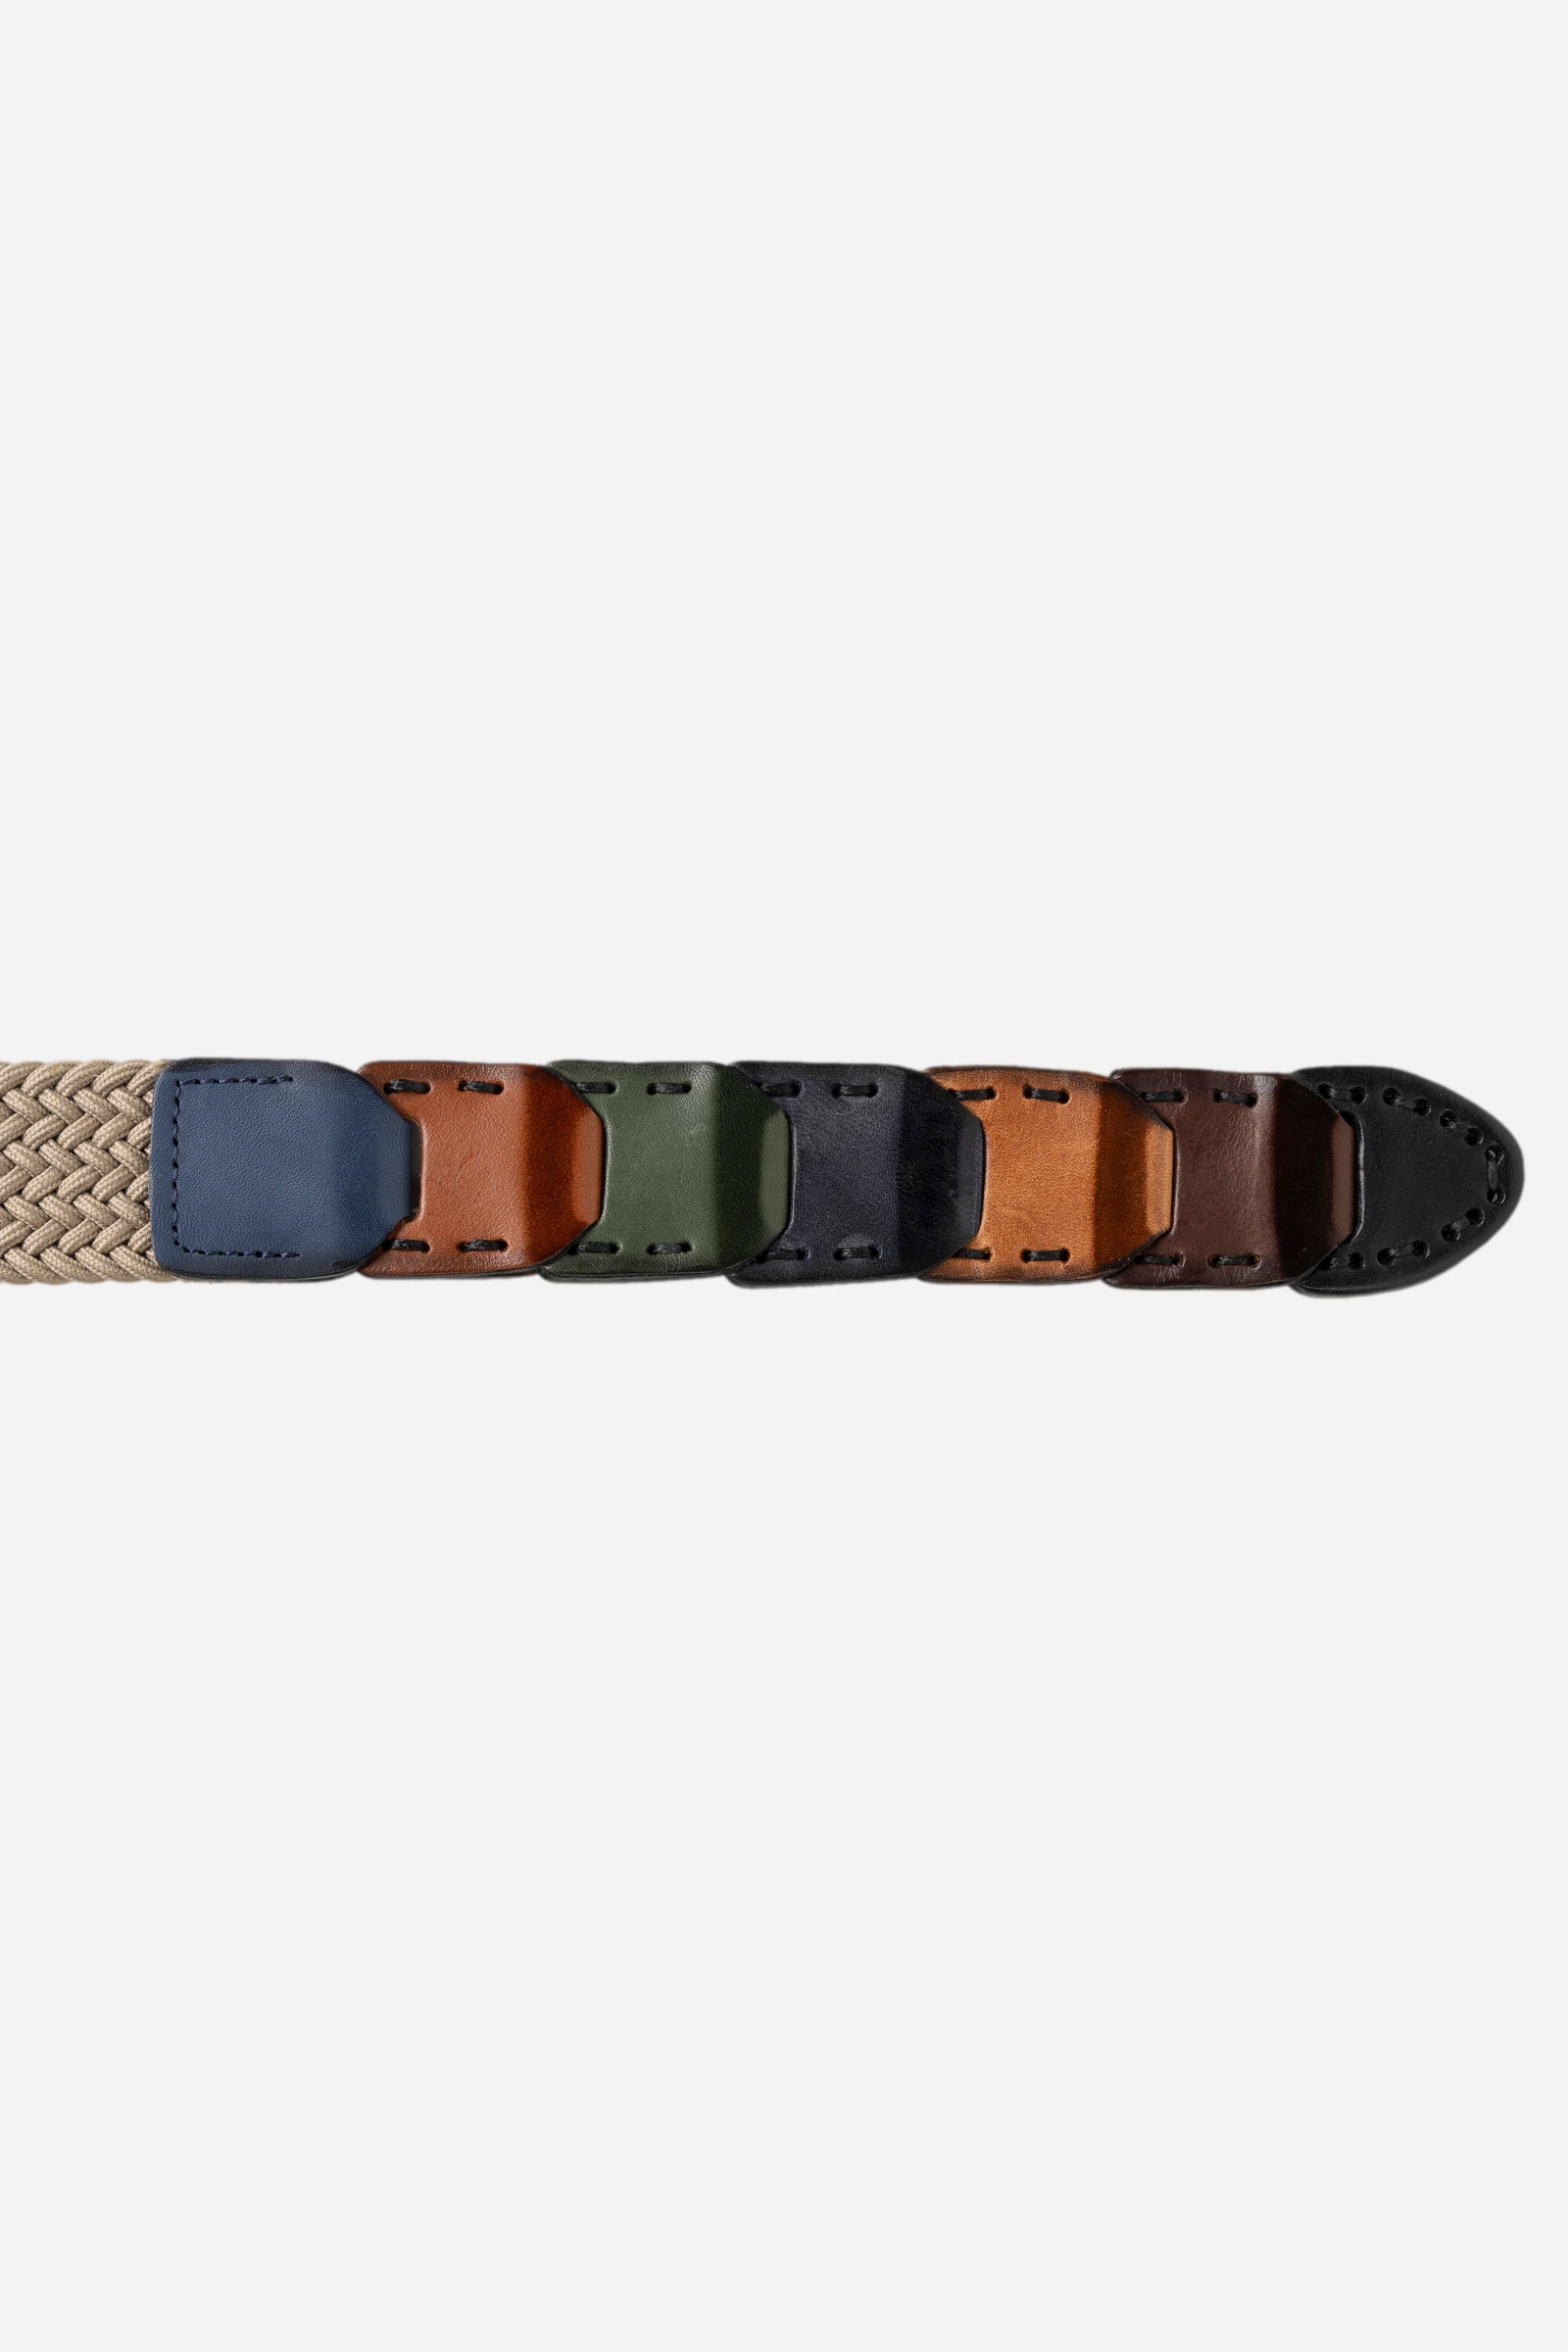 Men's belt in leather and fabric